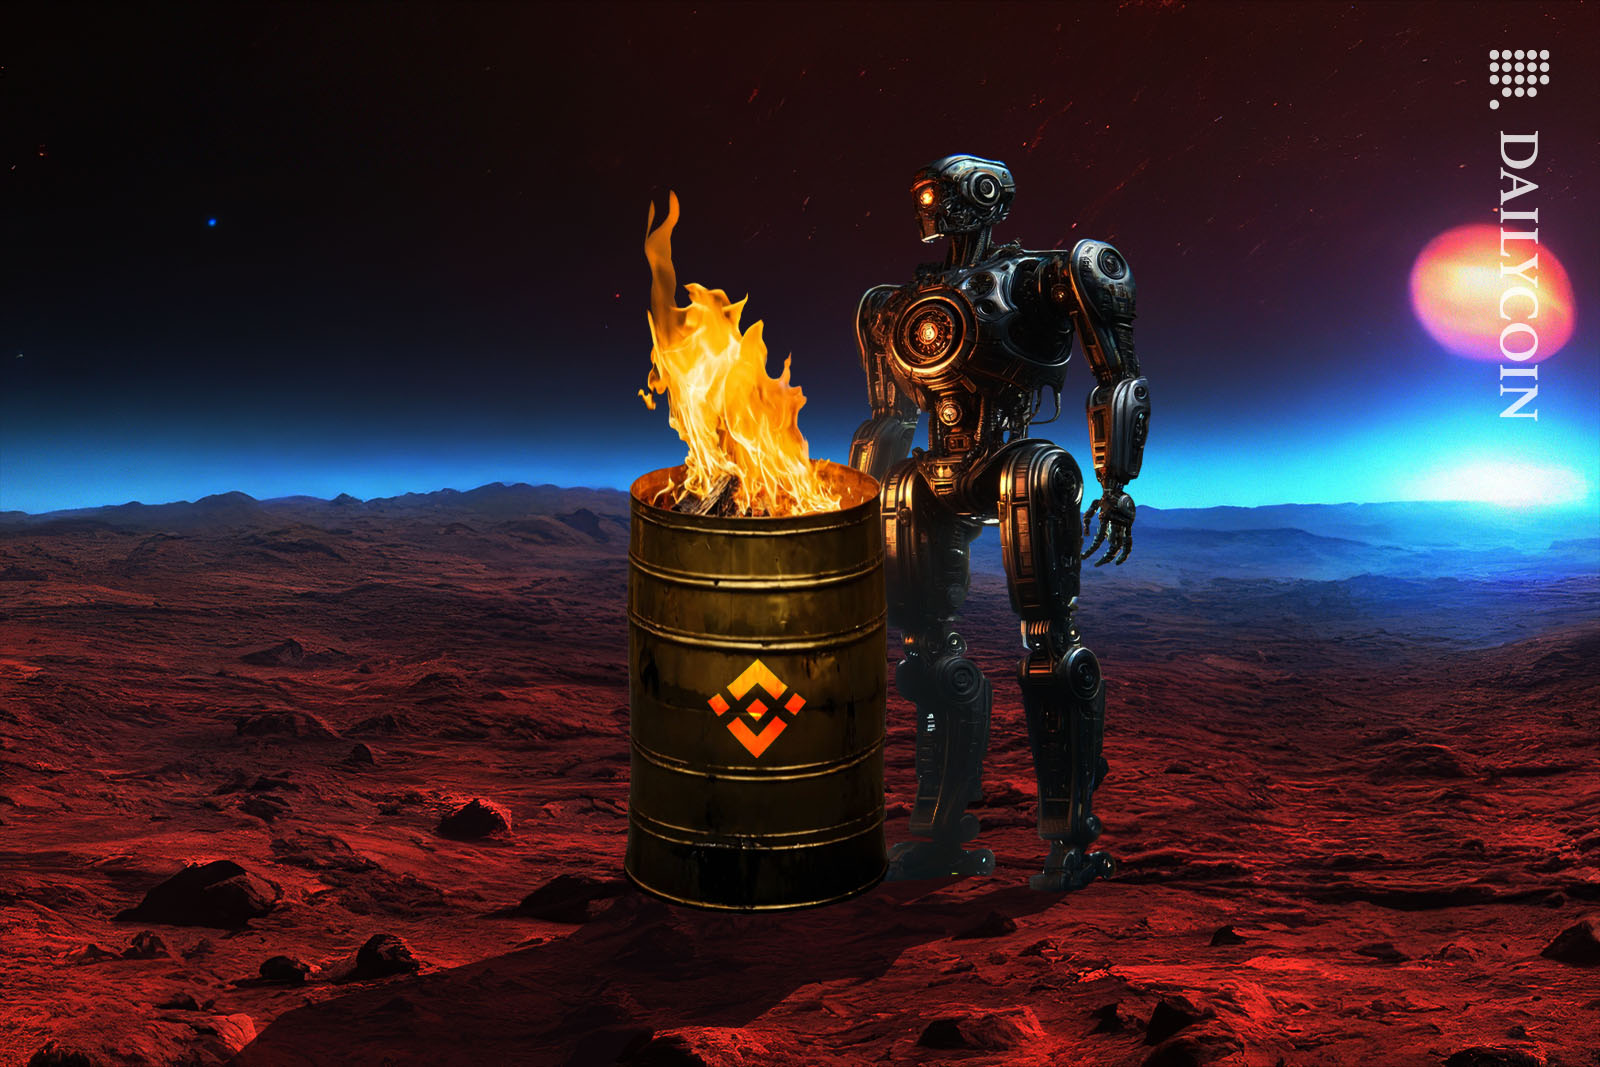 Robot standing next to a burning metal barrell with a Binance logo on it.